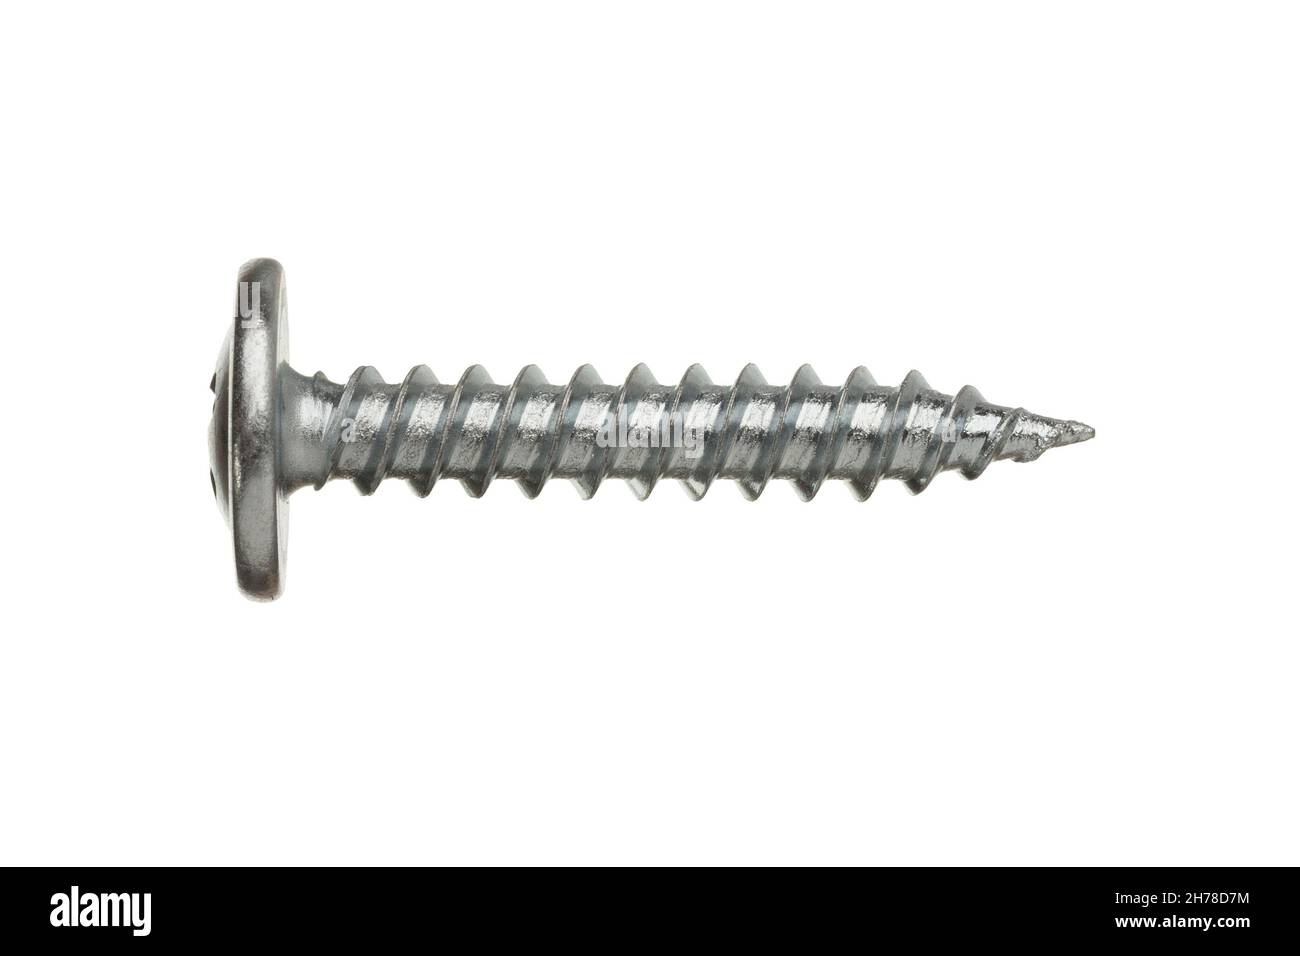 Stainless steel self-tapping screw isolated on white background. Stock Photo